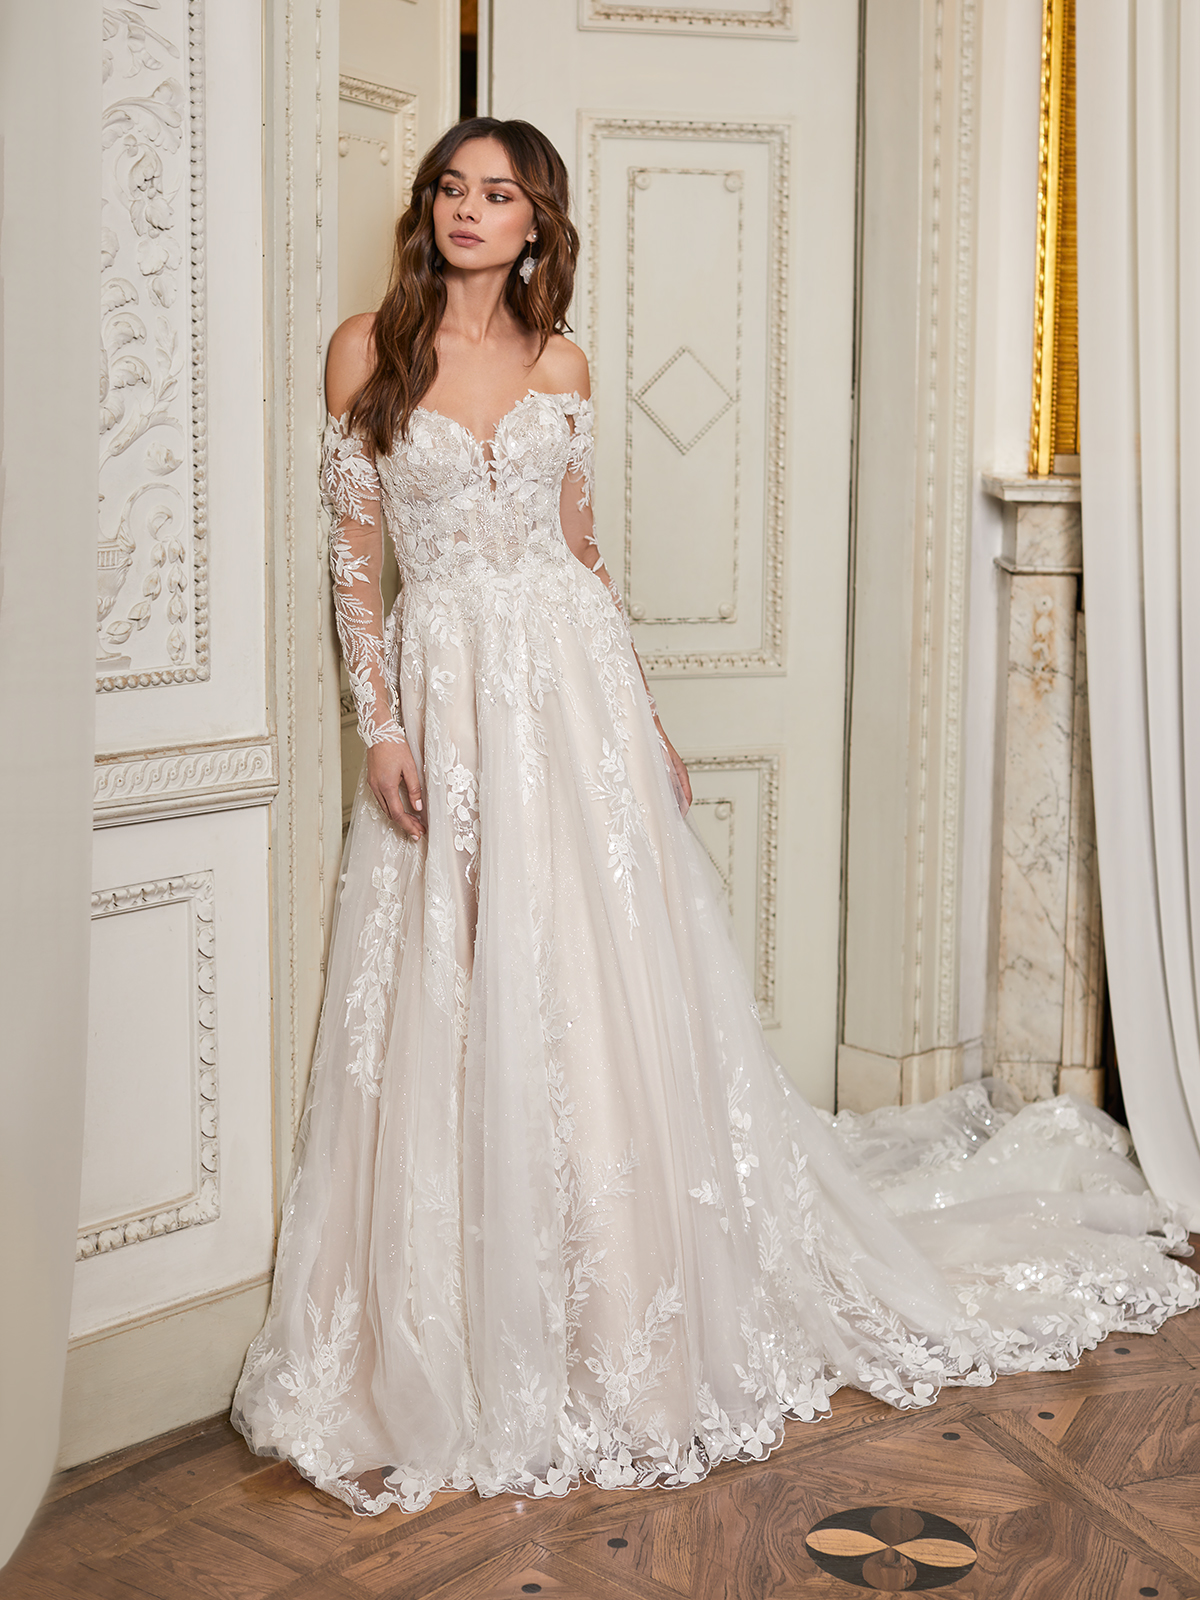 A Bridal Guide for Winter Wedding Dress Shopping